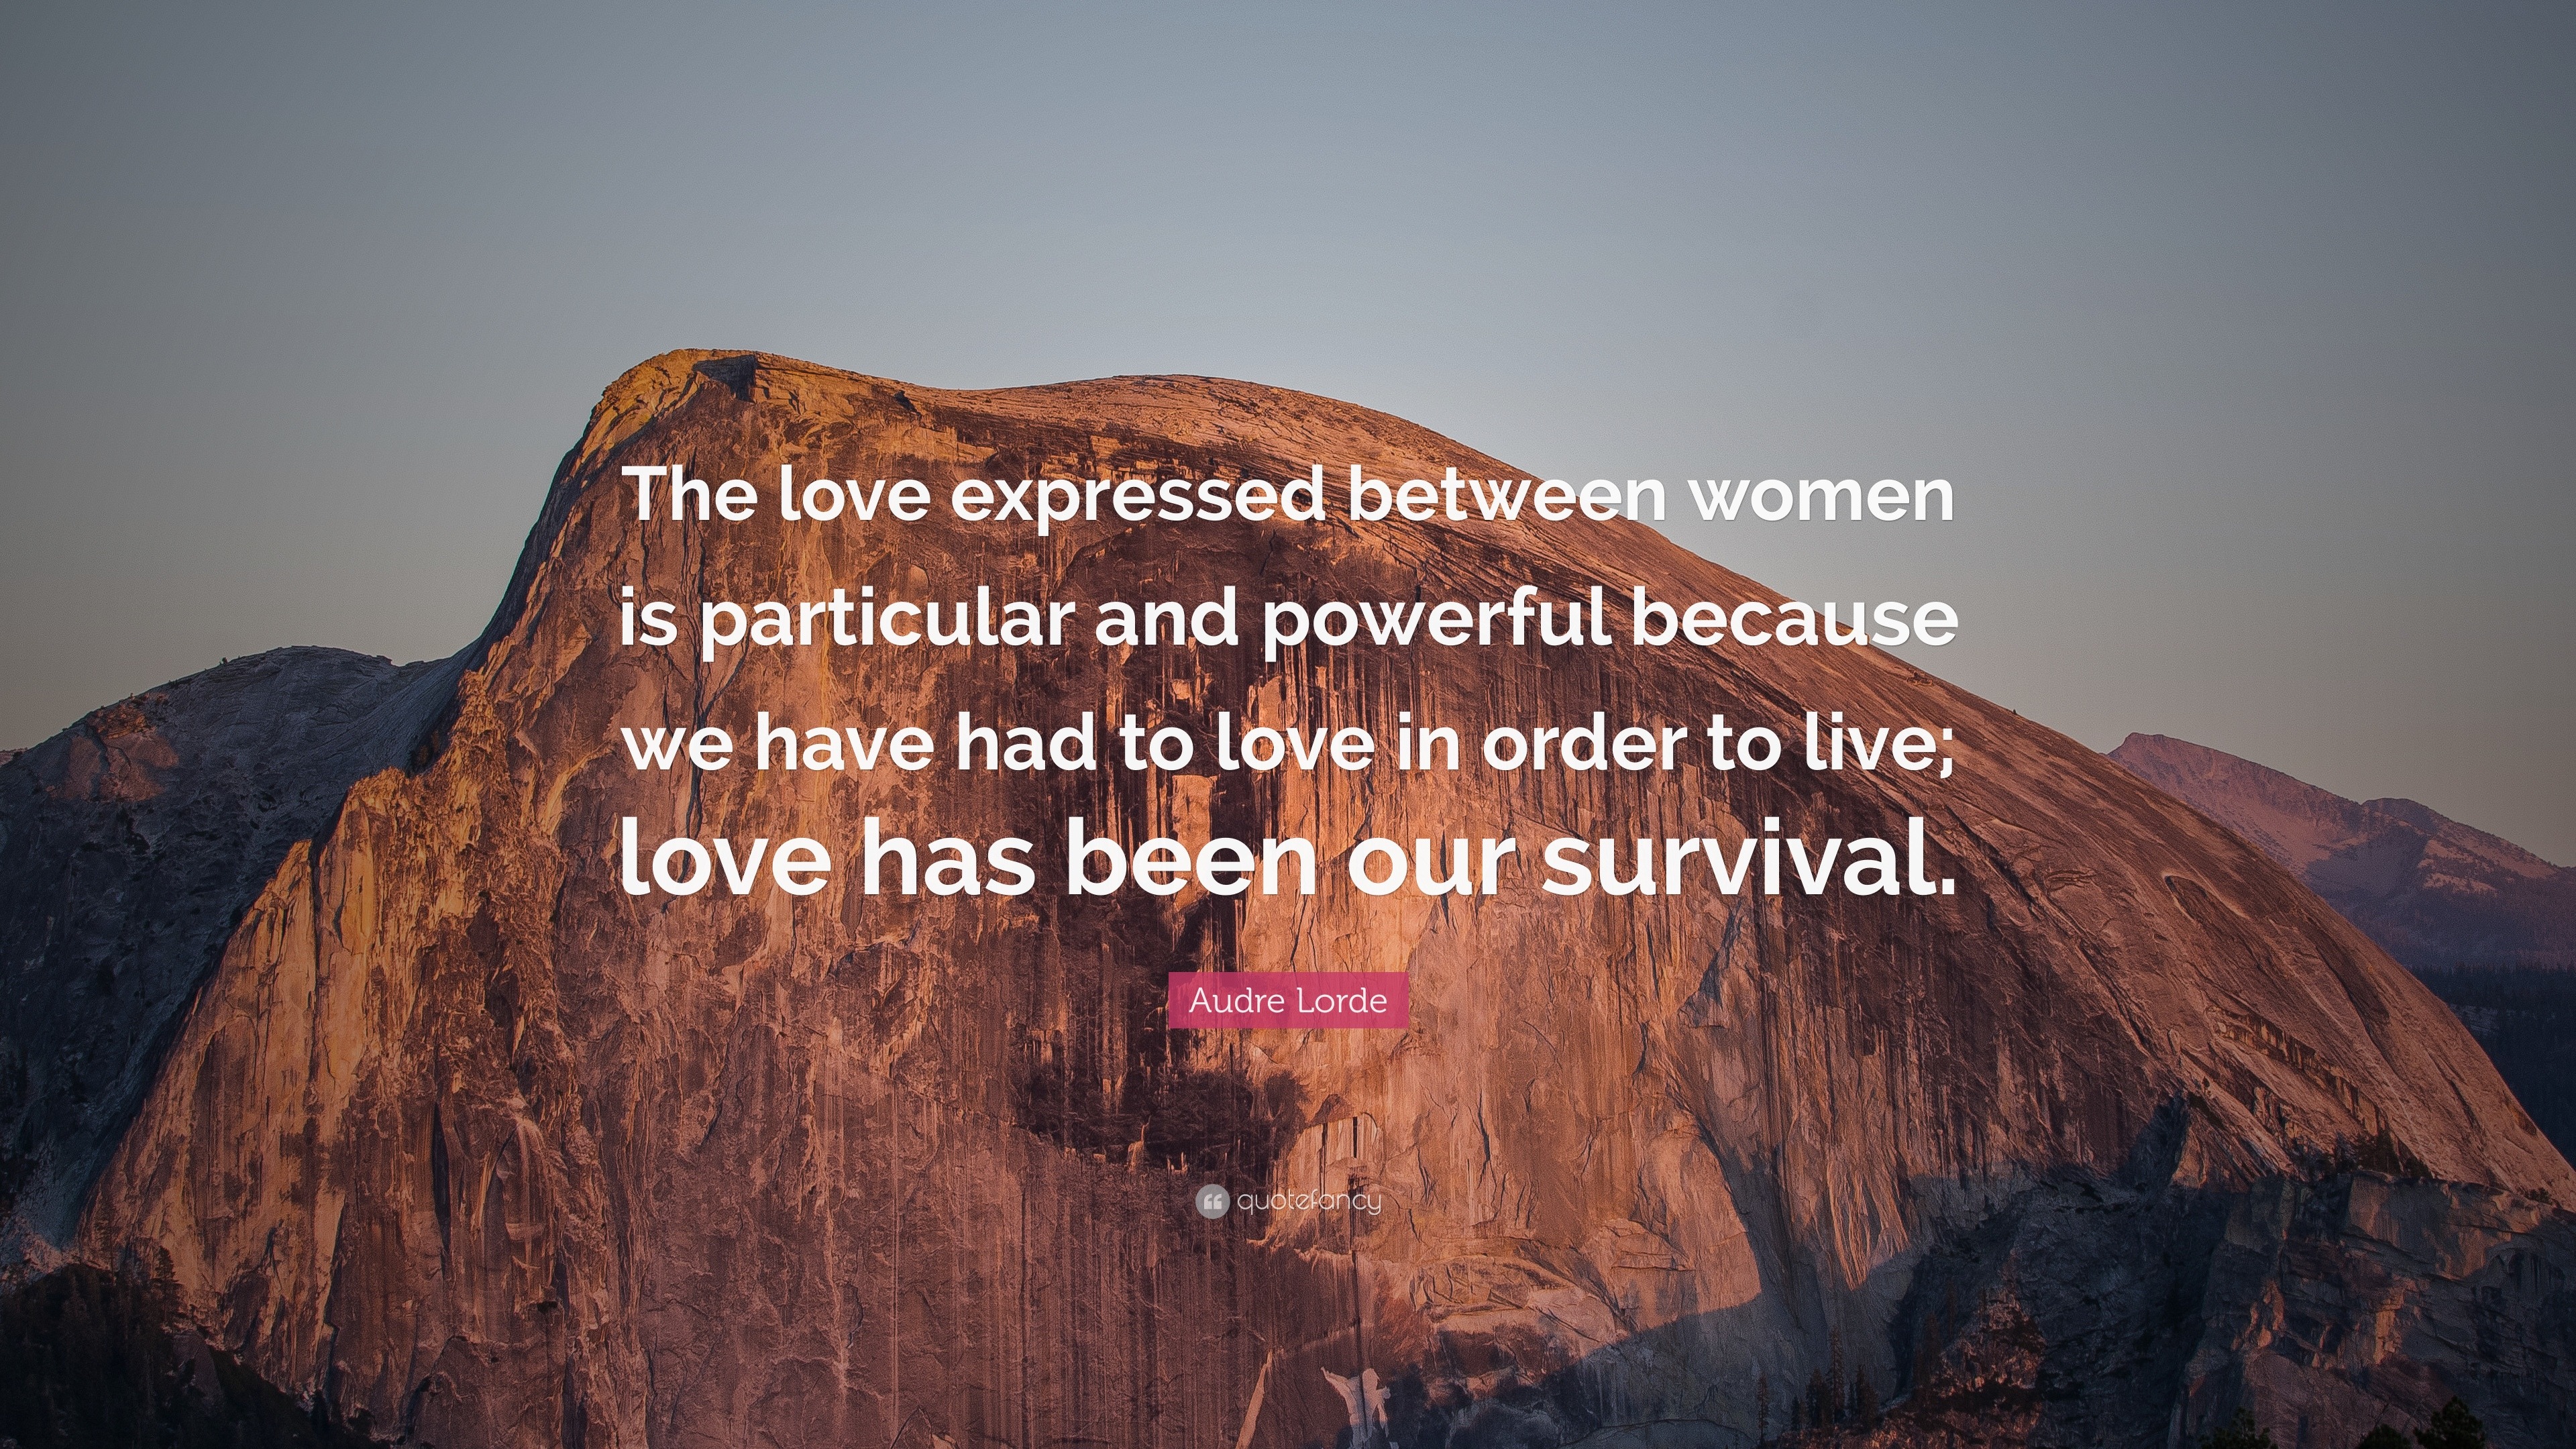 Audre Lorde Quote: “The love expressed between women is particular and ...